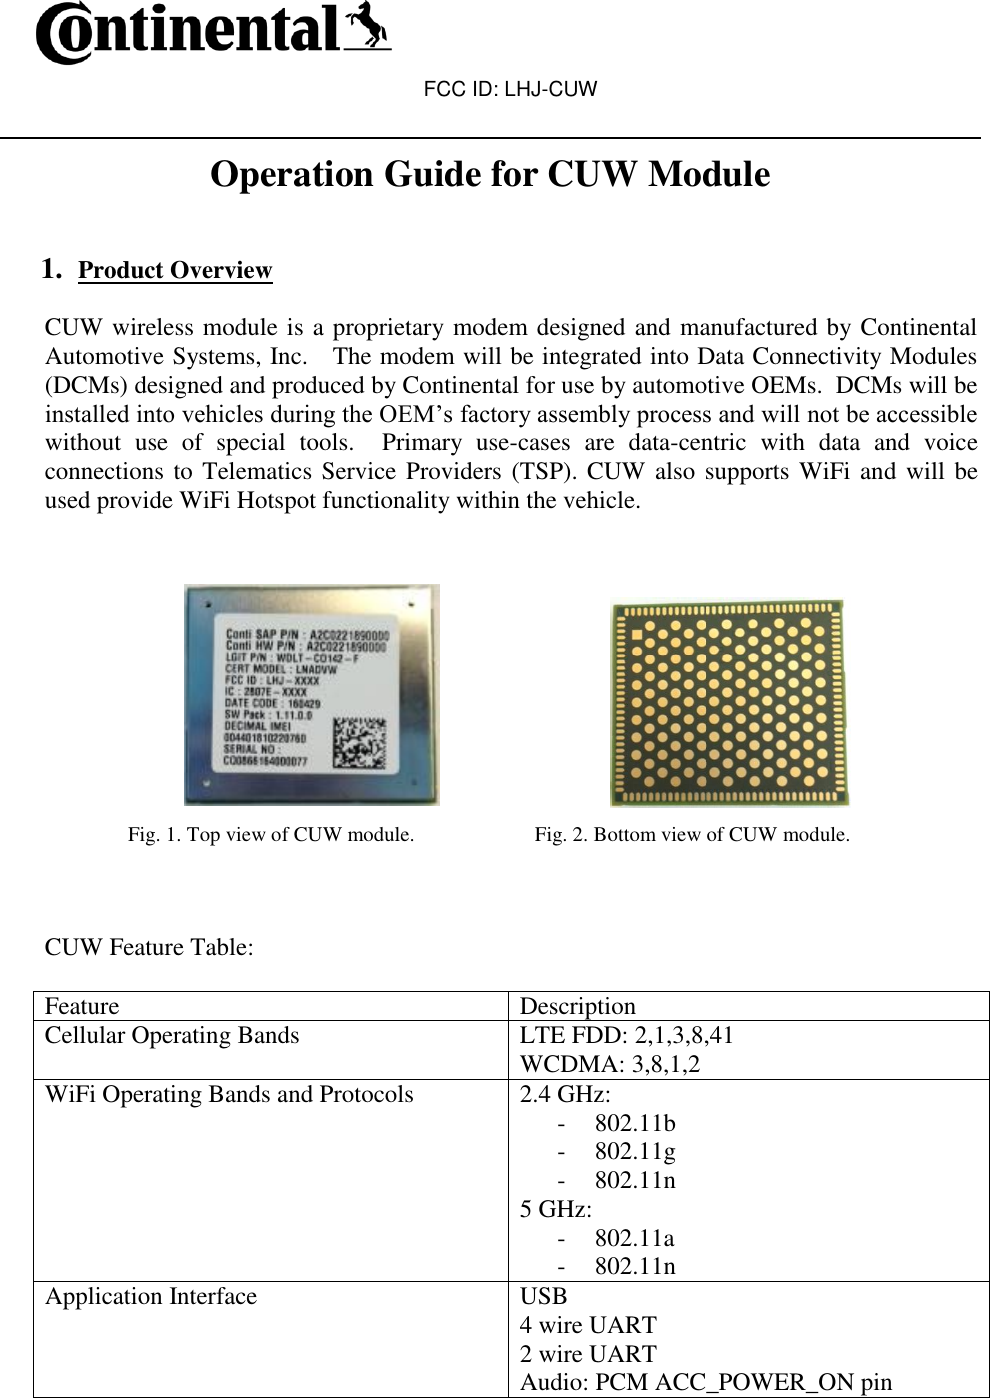 FCC ID: LHJ-CUW   Operation Guide for CUW Module   1. Product Overview  CUW wireless module is a proprietary modem designed and manufactured by Continental Automotive Systems, Inc.   The modem will be integrated into Data Connectivity Modules (DCMs) designed and produced by Continental for use by automotive OEMs.  DCMs will be installed into vehicles during the OEM’s factory assembly process and will not be accessible without  use  of  special  tools.    Primary  use-cases  are  data-centric  with  data  and  voice connections to Telematics Service Providers (TSP). CUW also supports WiFi and will be used provide WiFi Hotspot functionality within the vehicle.                                                                 Fig. 1. Top view of CUW module.                       Fig. 2. Bottom view of CUW module.    CUW Feature Table:  Feature Description Cellular Operating Bands LTE FDD: 2,1,3,8,41  WCDMA: 3,8,1,2 WiFi Operating Bands and Protocols 2.4 GHz:  - 802.11b - 802.11g - 802.11n 5 GHz: - 802.11a - 802.11n Application Interface USB 4 wire UART 2 wire UART Audio: PCM ACC_POWER_ON pin 